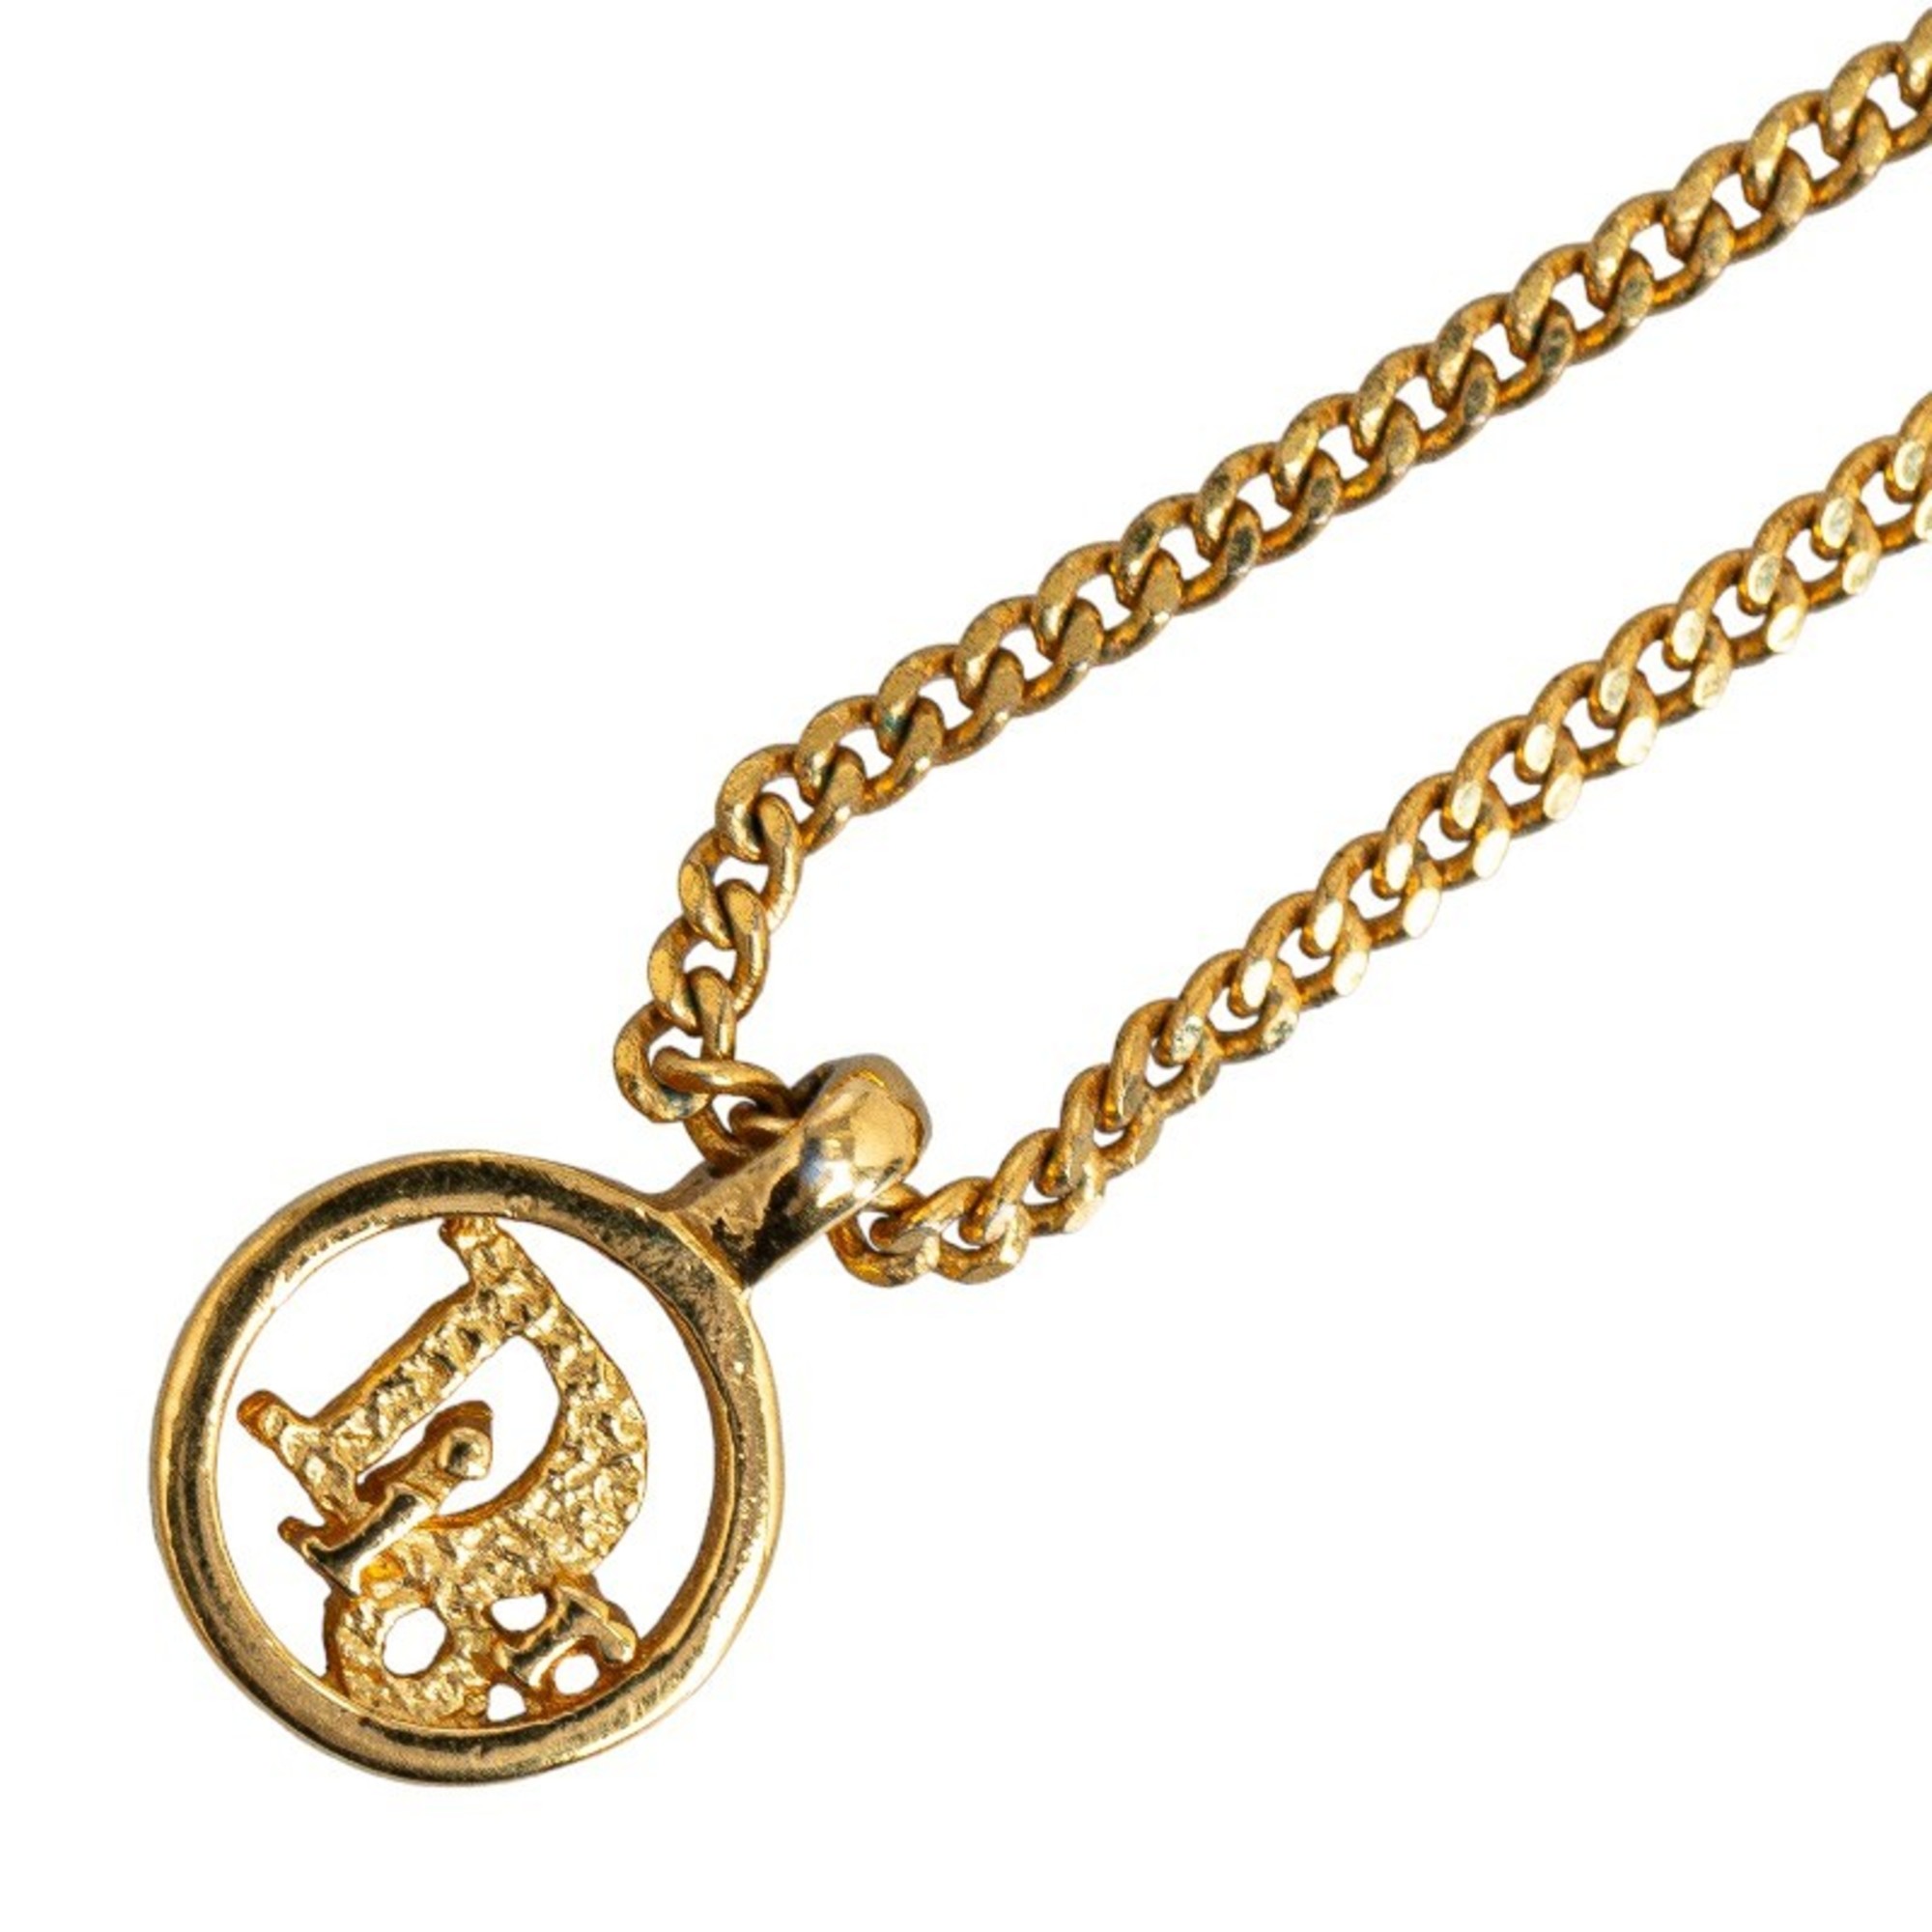 Christian Dior Dior necklace gold plated ladies